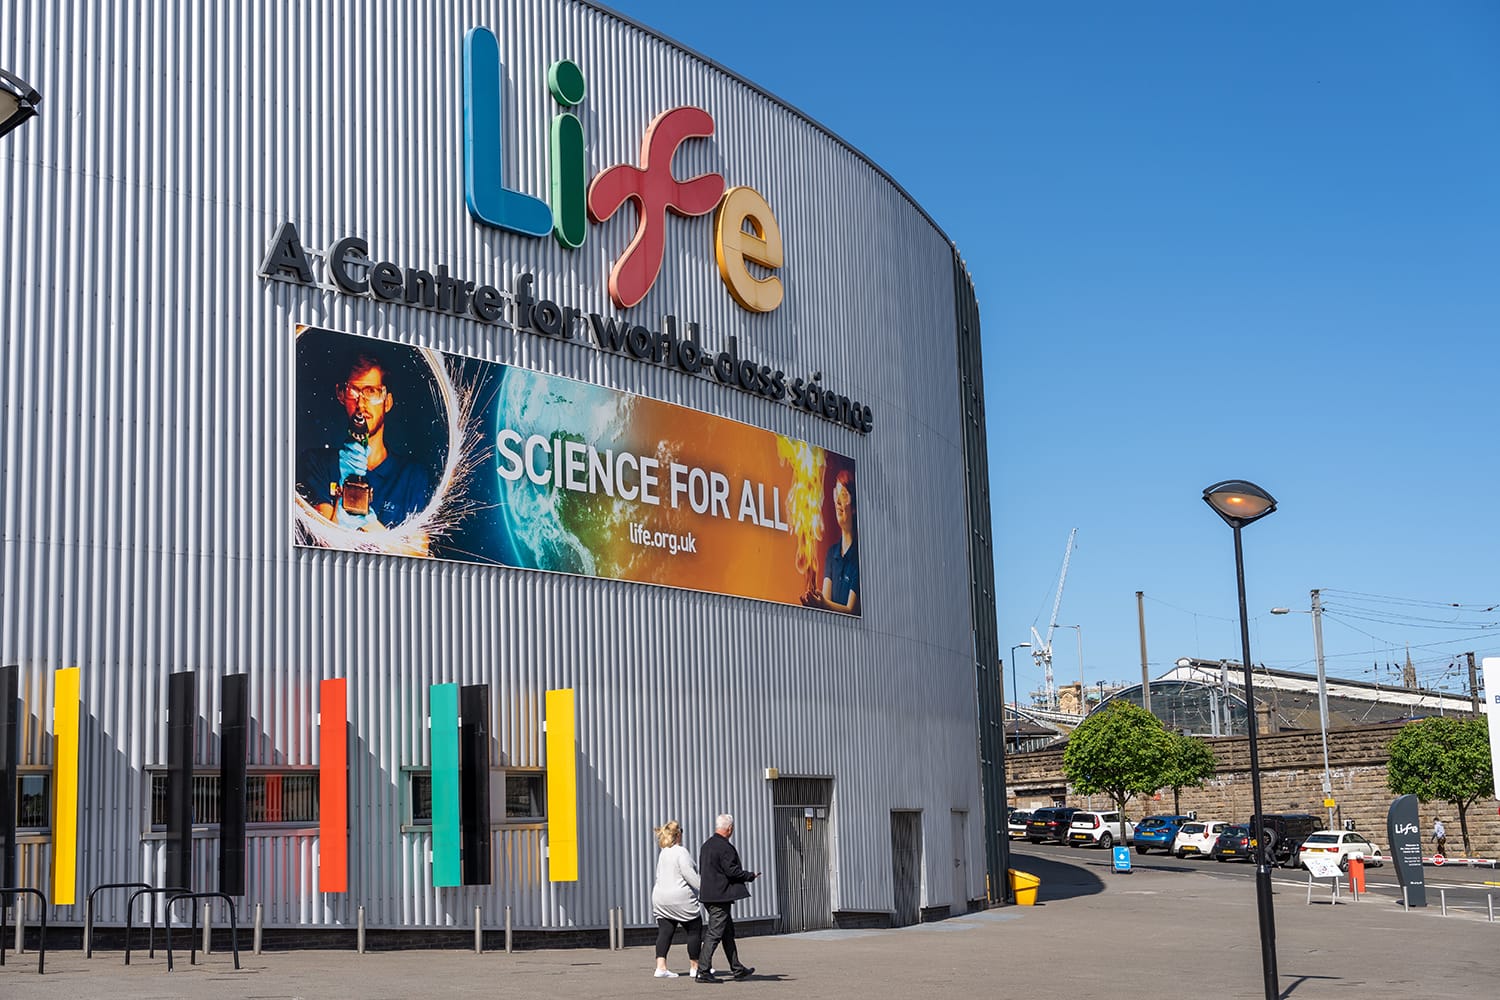 Life Science Centre in Newcastle upon Tyne, UK